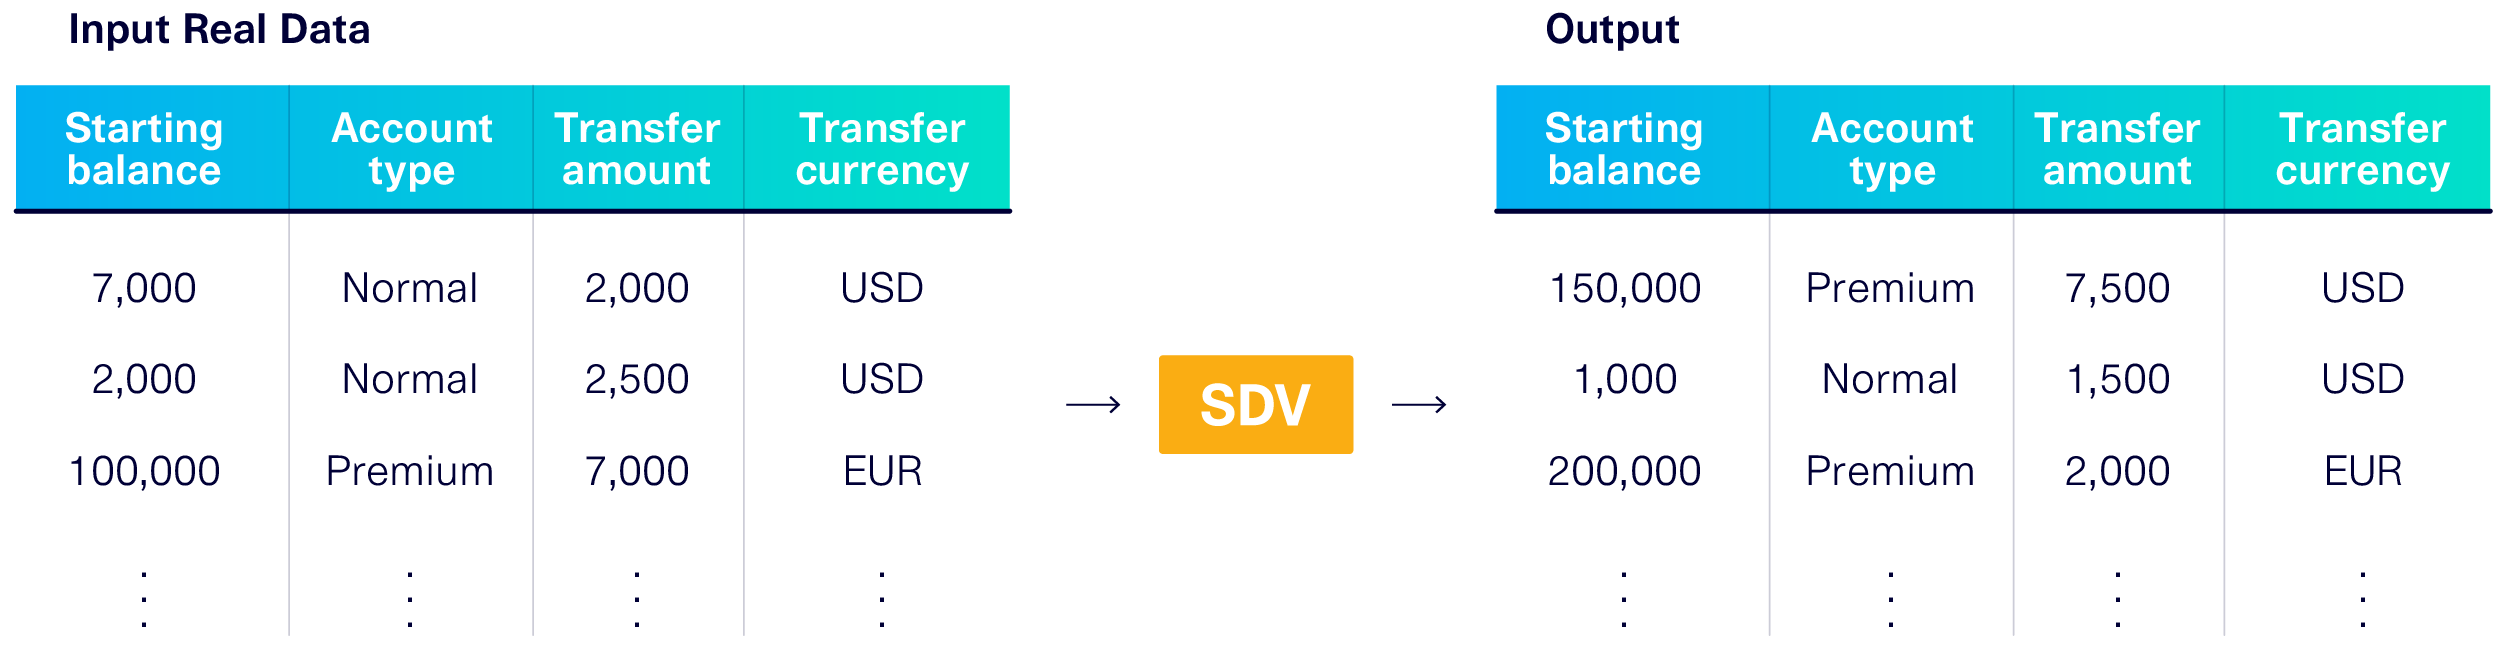 With ML tools (like the SDV), you input real data into the software. The software then learns patterns from the data and outputs data that matches those patterns.